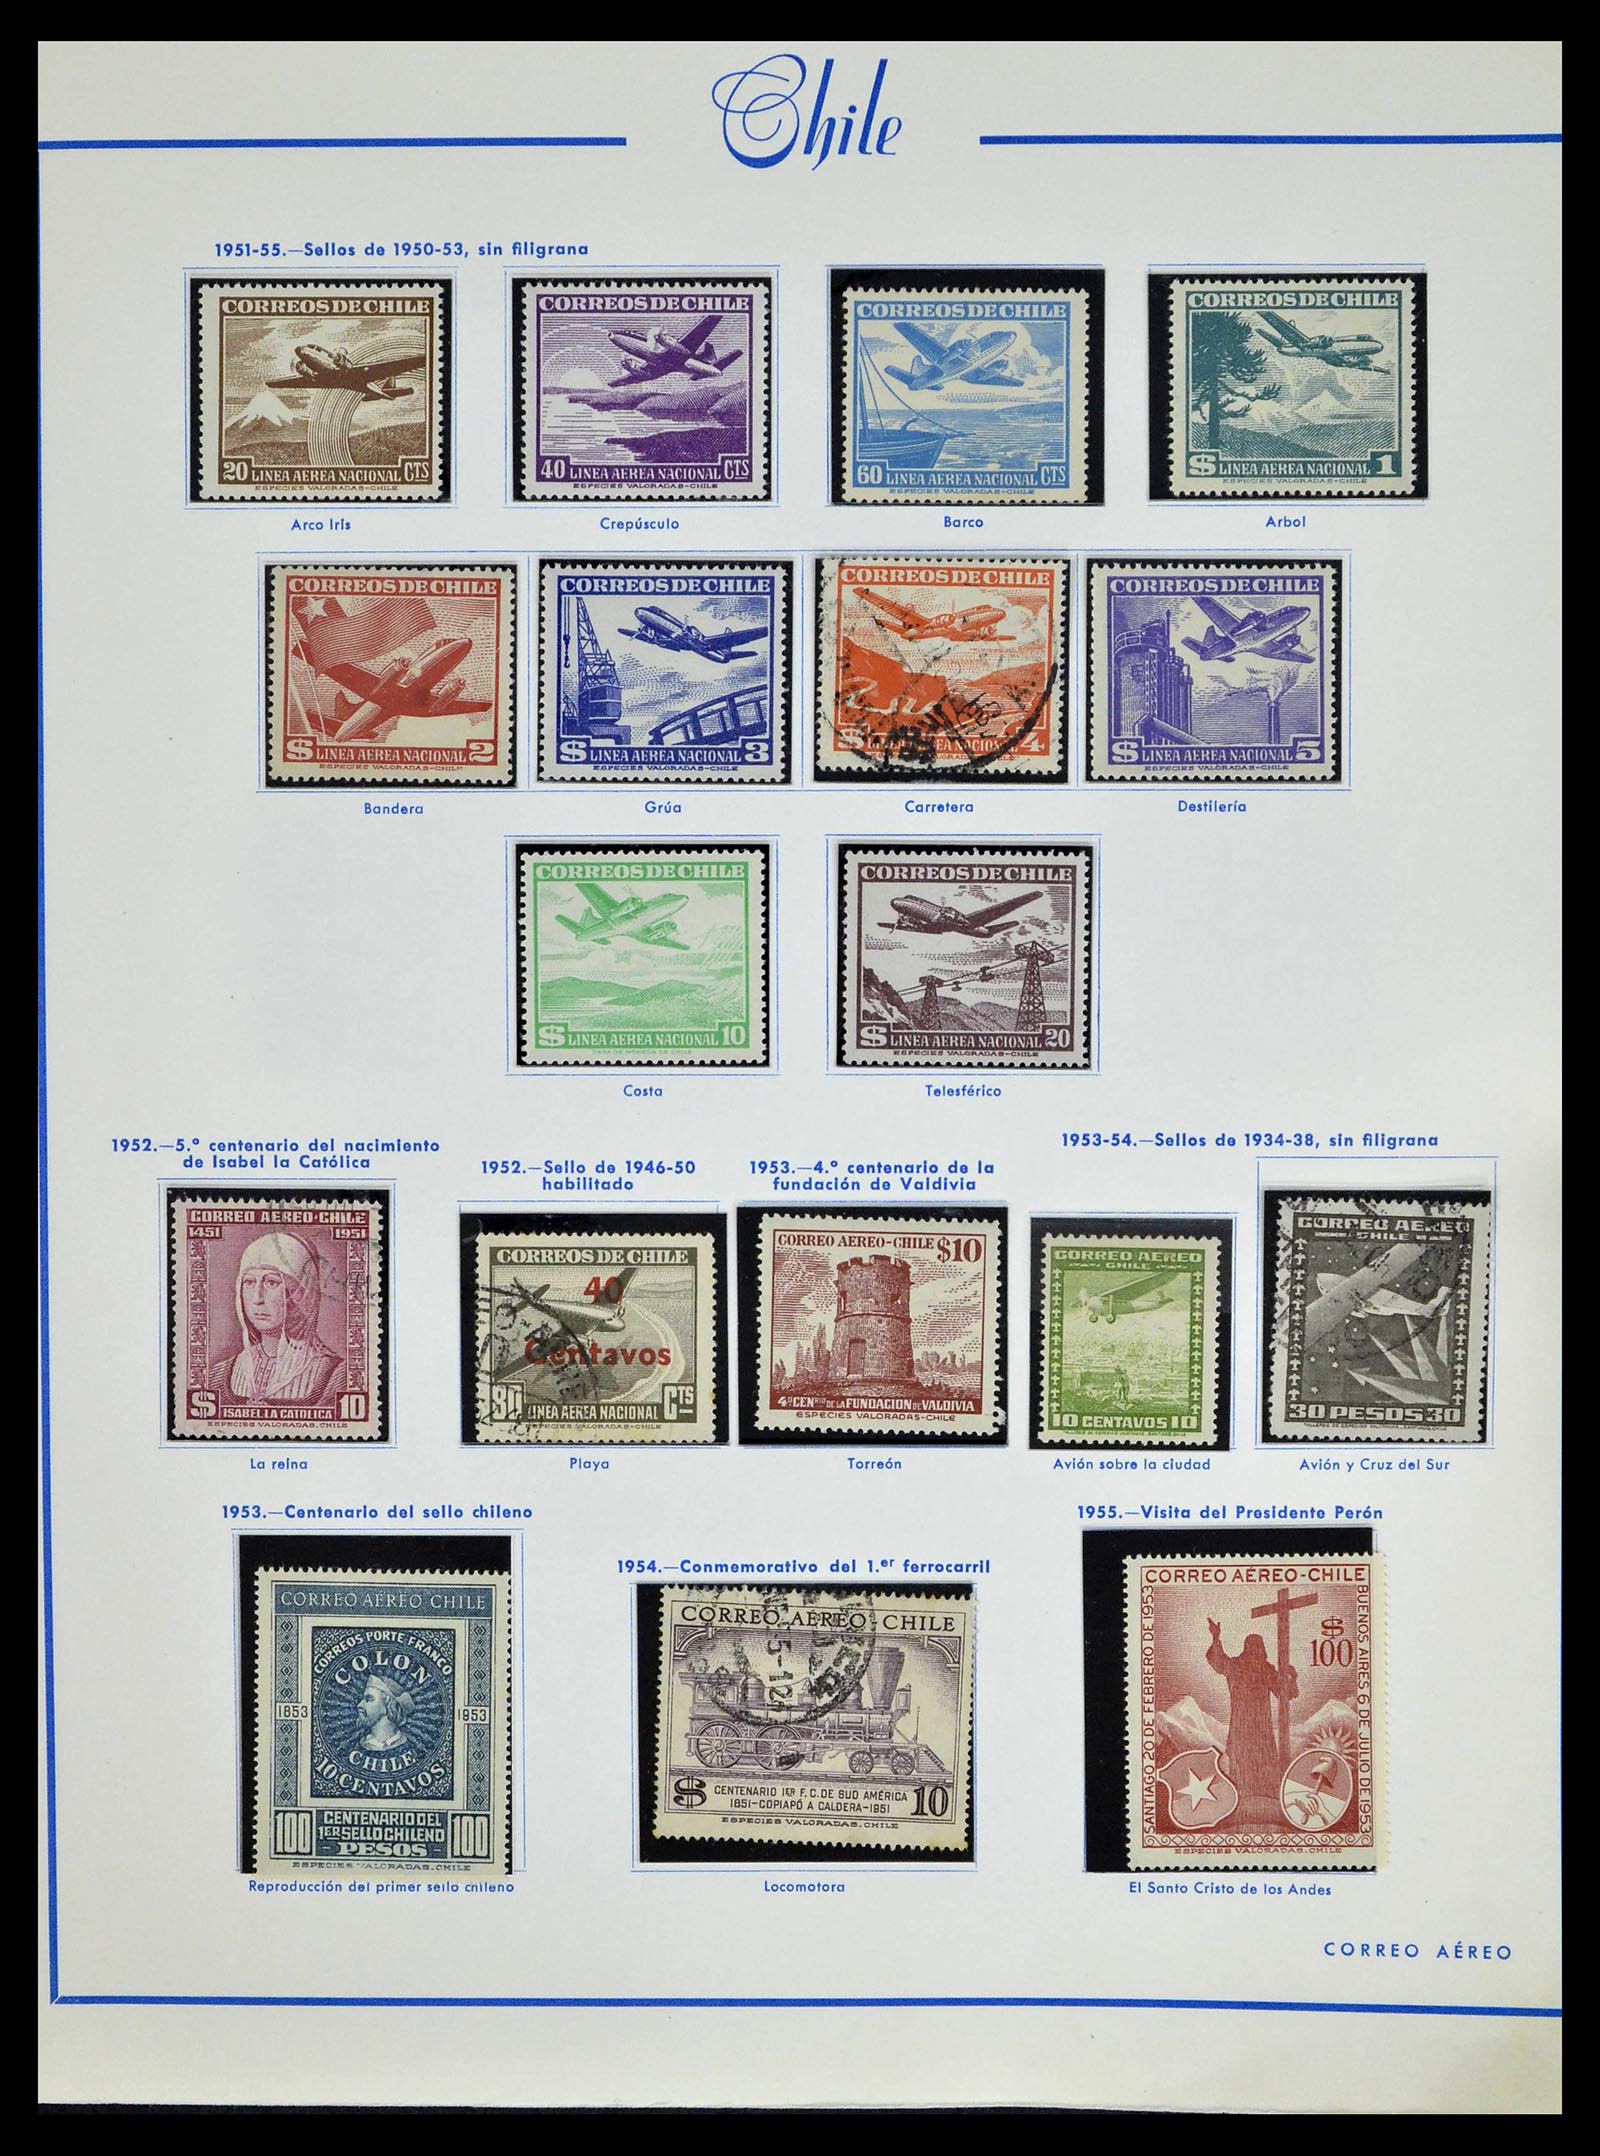 39213 0052 - Stamp collection 39213 Chile 1853-1970.